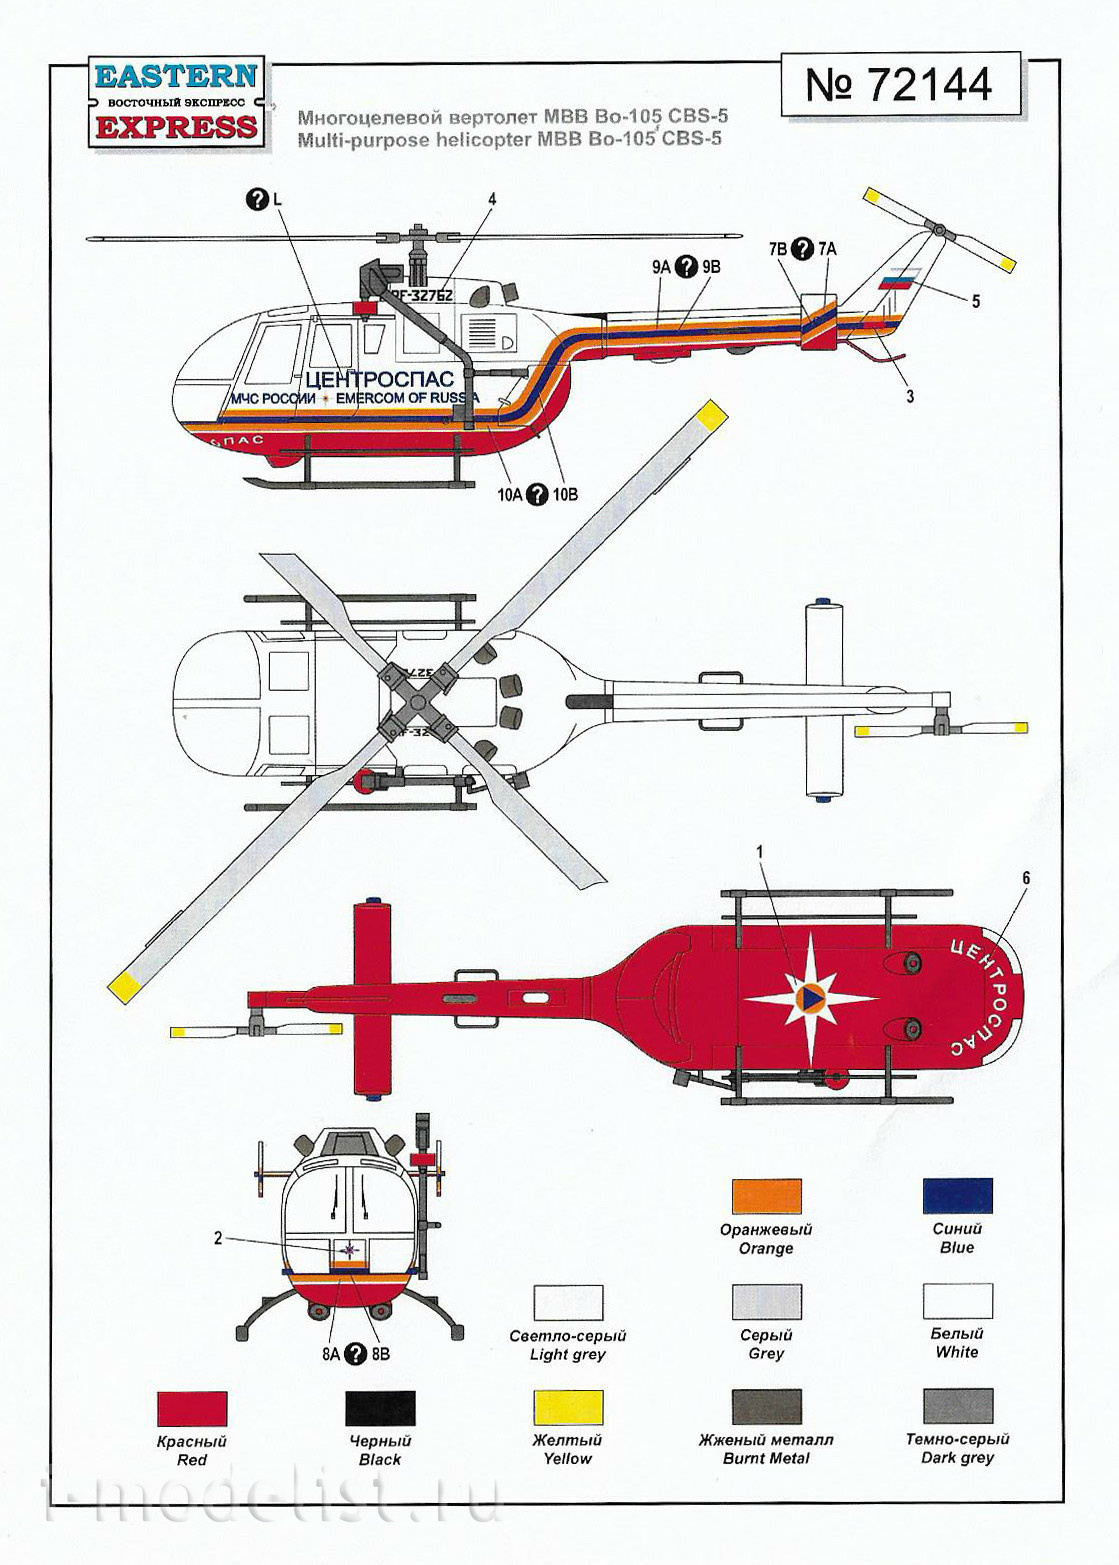 72144 Orient Express 1/72 Multipurpose helicopter Bo-105 CBS-5 MES